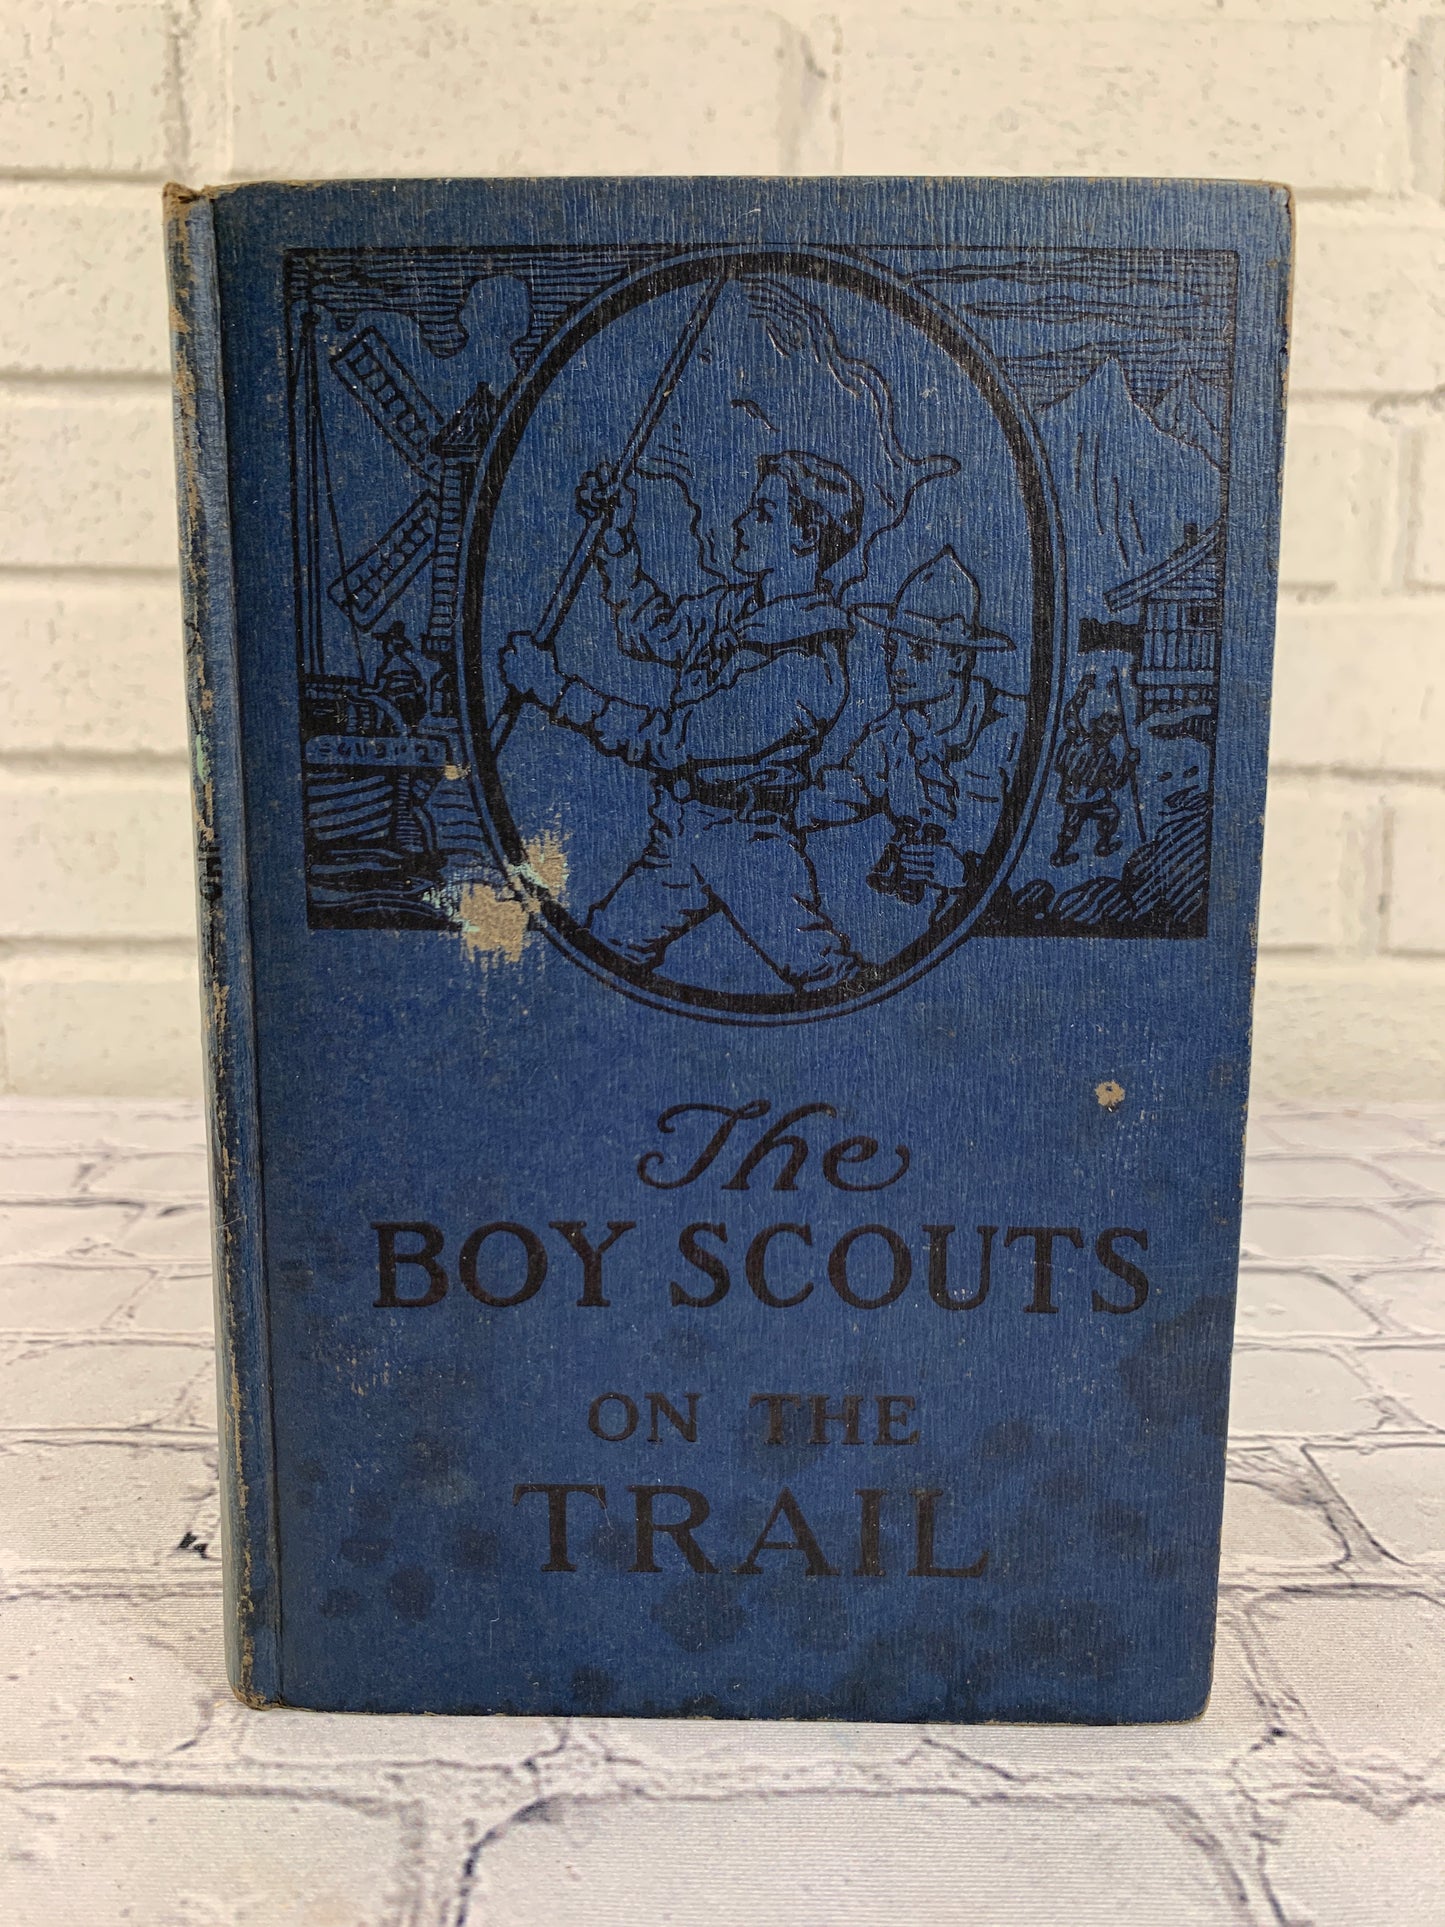 The Boy Scouts on the Trail by George Durston [1921]